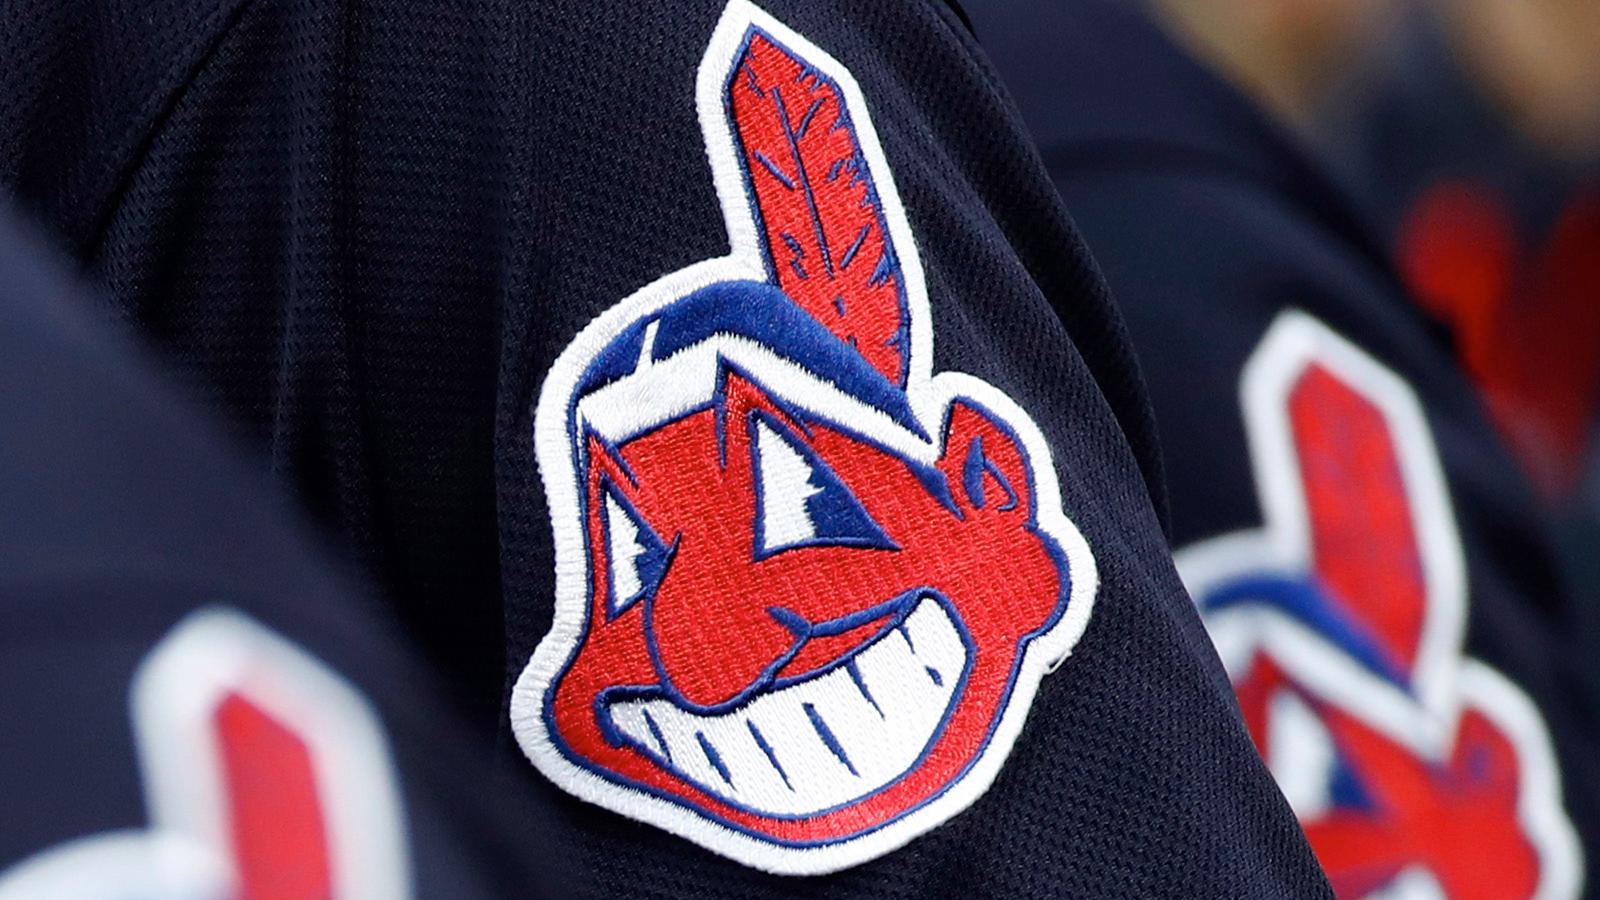 wallpaper cleveland indians chief wahoo